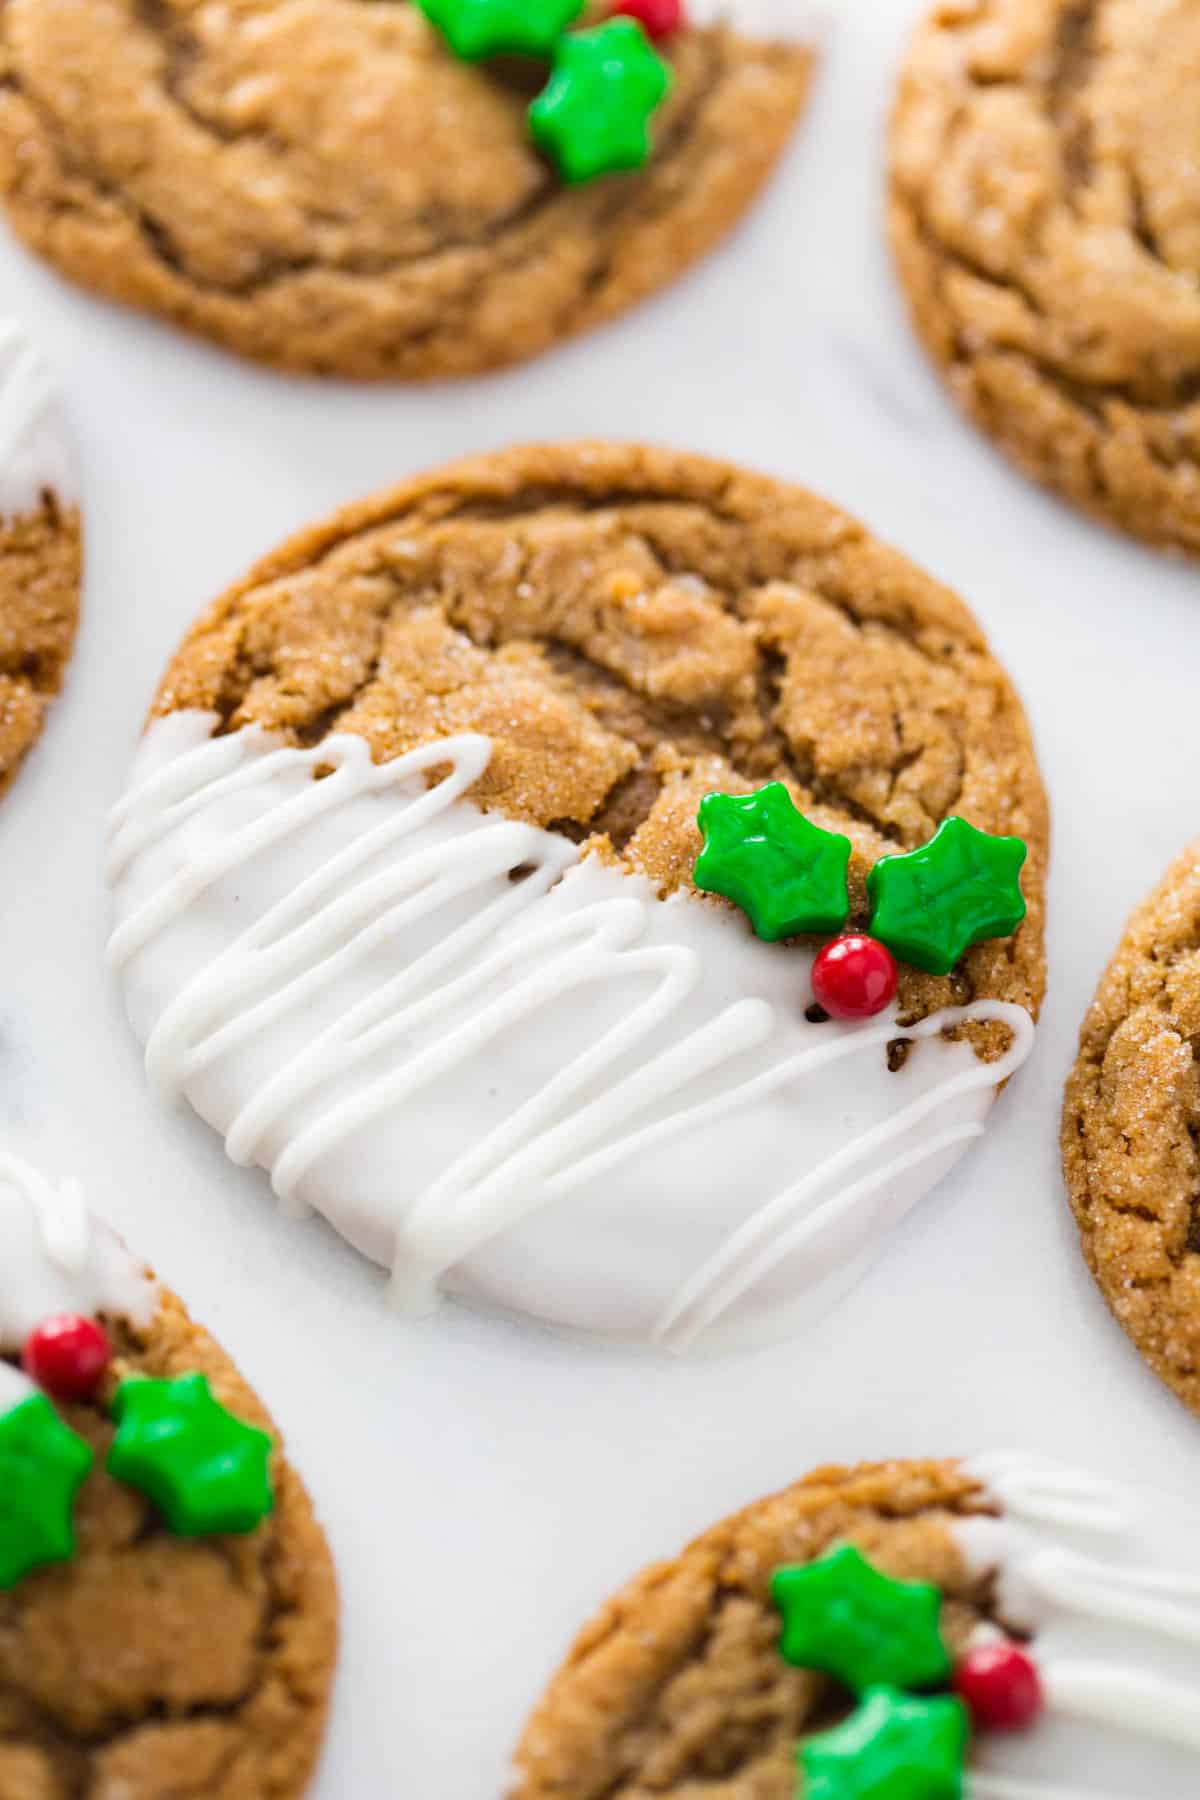 Ginger molasses cookies dipped in white chocolate.